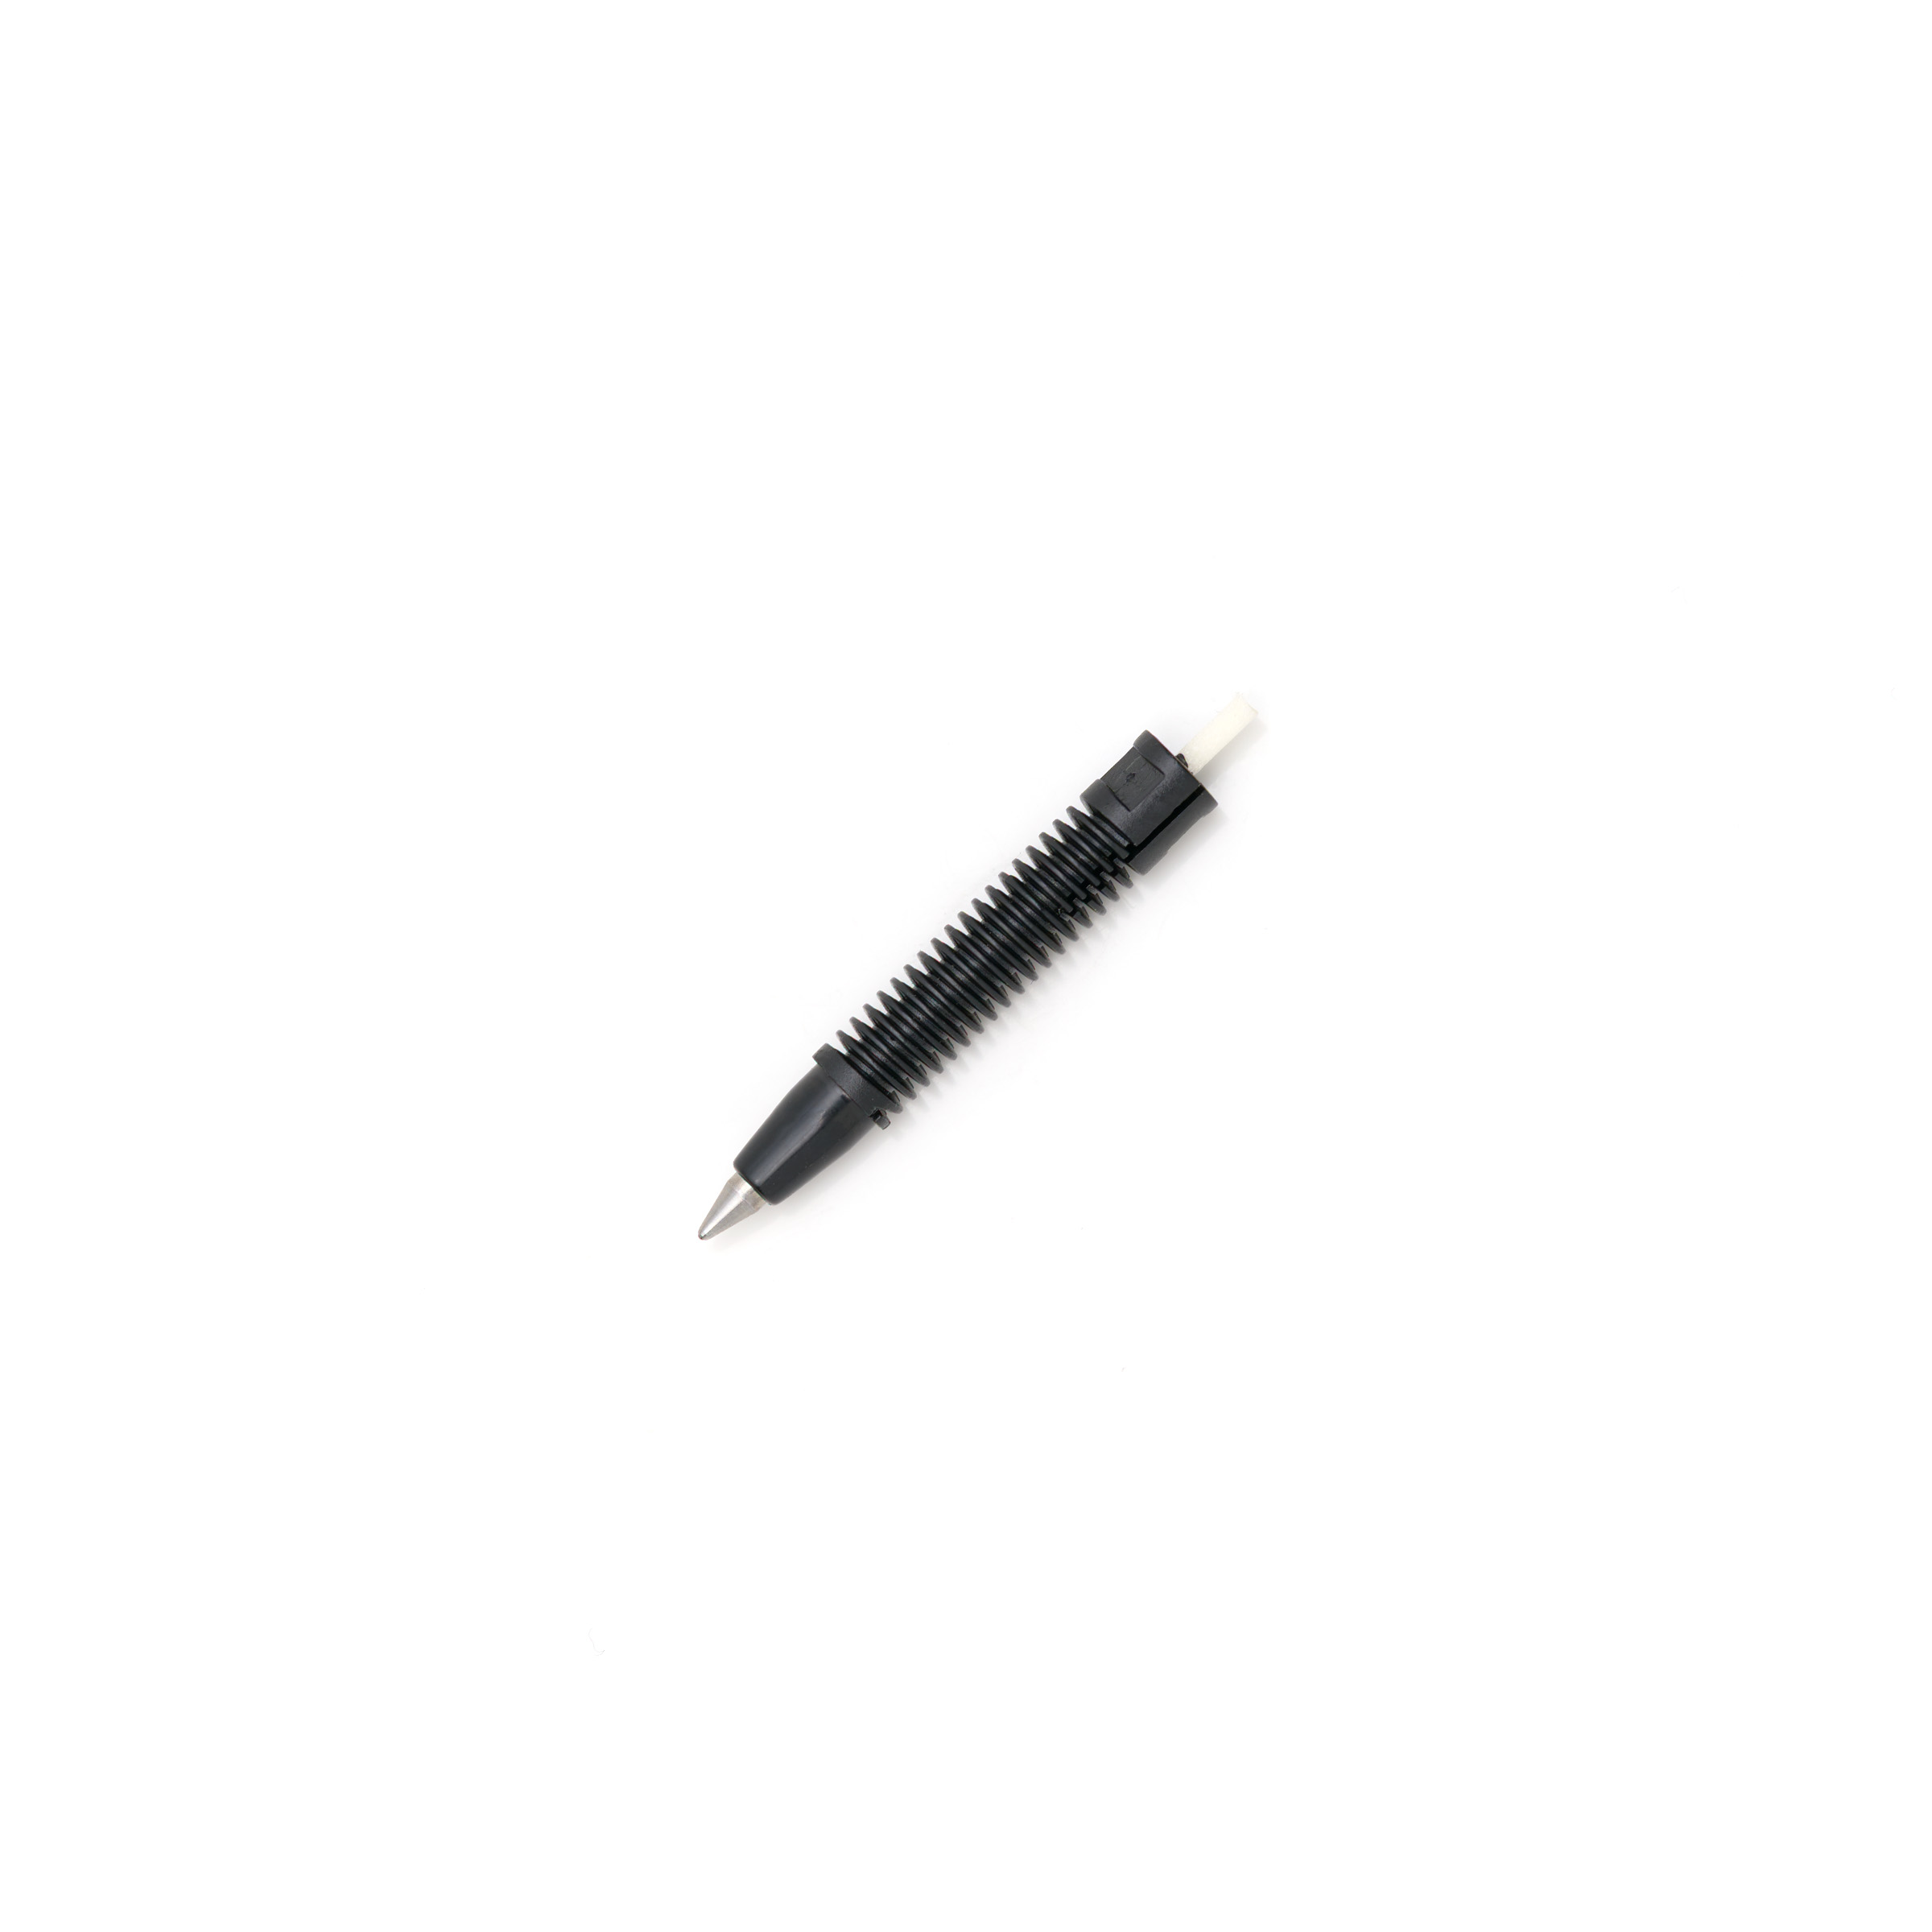 SUPER5 iR Ink Rollerball Pen B <br>Writing Tip with Assembly Aid